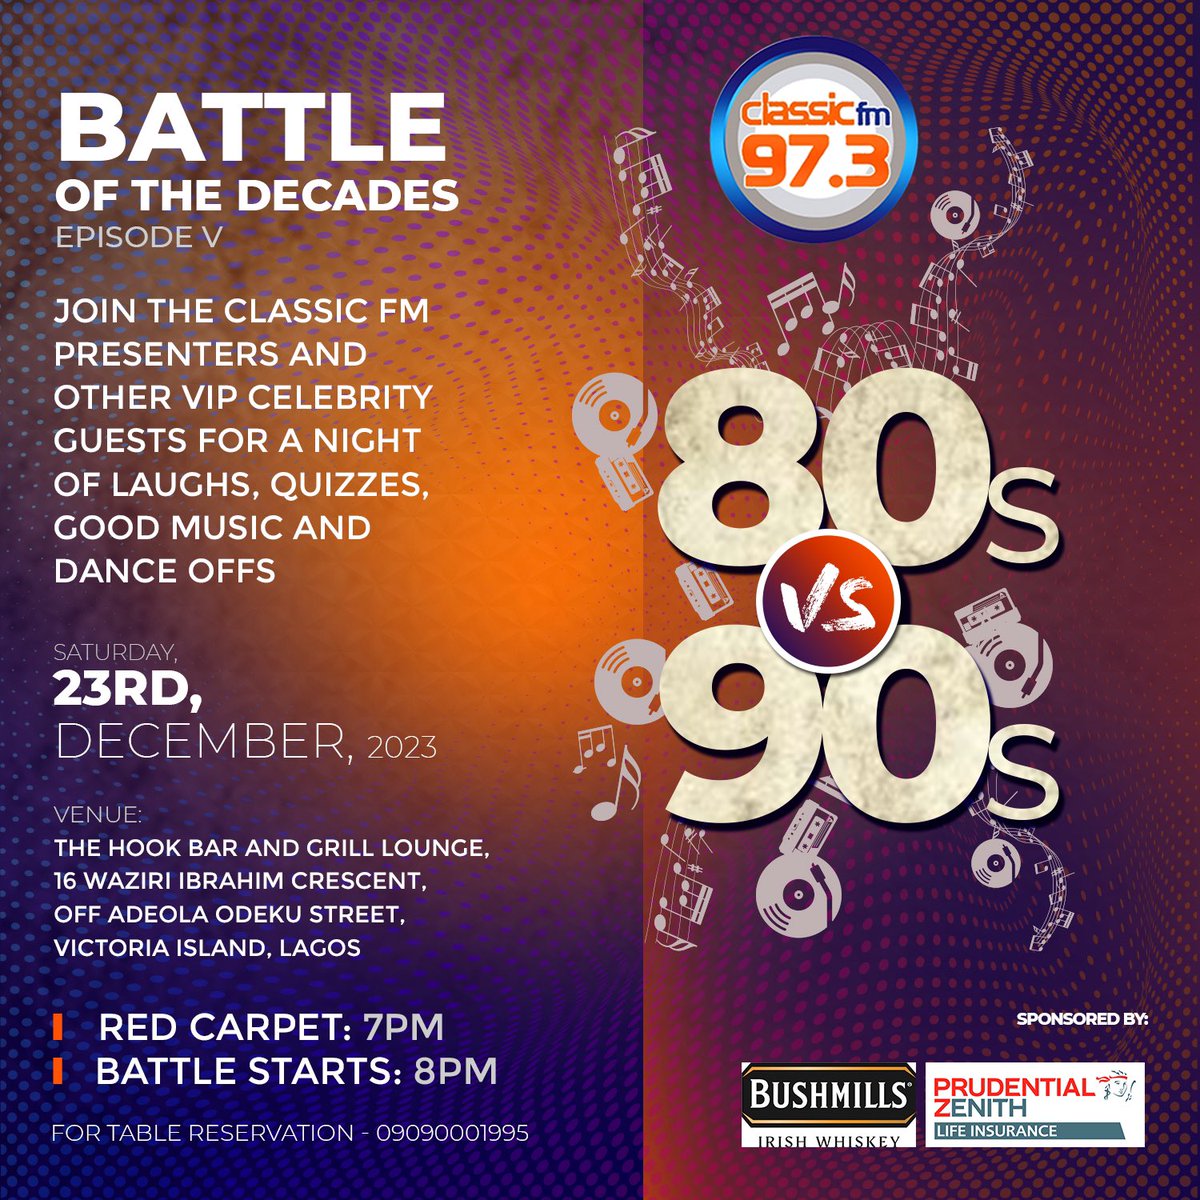 Join us for the Battle of the Decades - 80s vs. 90s edition 🎶 🔥 Enjoy a night of fun, music and drinks while we bring back the classics! On December 23rd 2023 we’ll find out which decade will reign supreme. #BOTD #ClassicFM #music #celebration